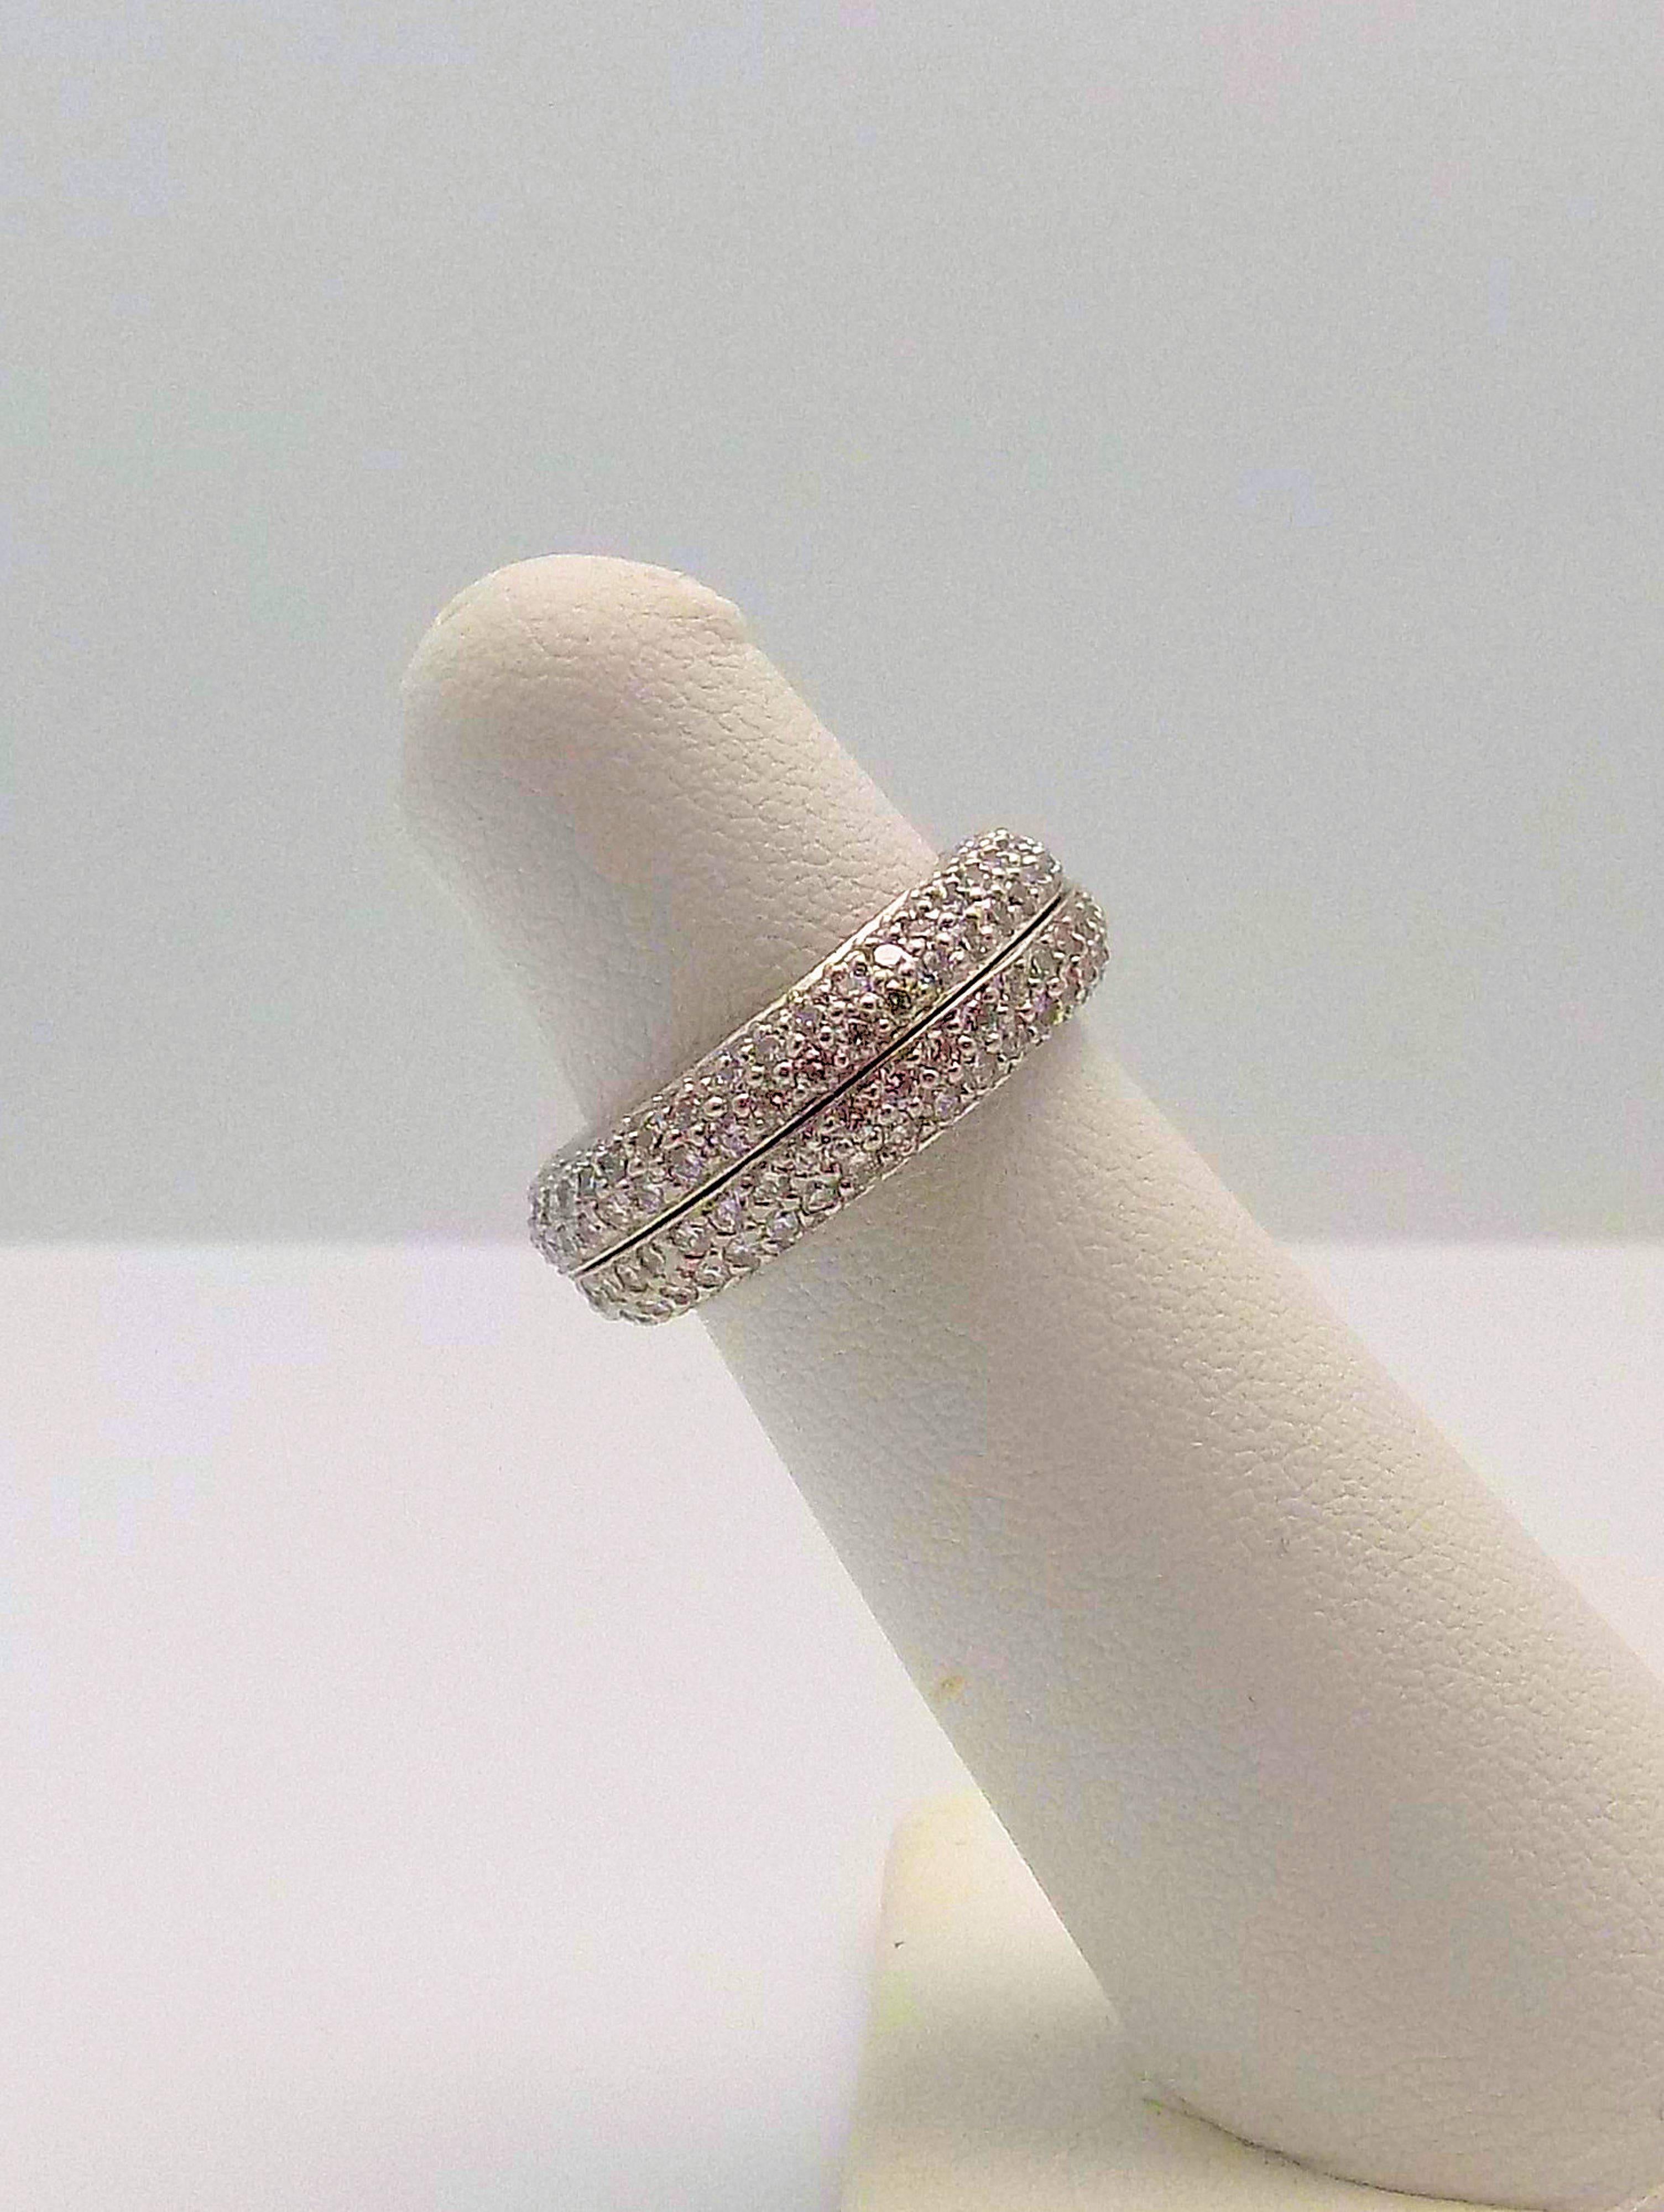 Platinum Pave' Eternity Bands, 1/2 Round, 230 Round Brilliant Diamonds 1.50 CT TW, VS, G, Finger Size 4, Signed: Matthew Trent. 7.8 DWT or 12.13 Grams.

About MATTHEW TRENT: Preston Hollow jeweler Matthew Trent has seen it all in his 30 years of